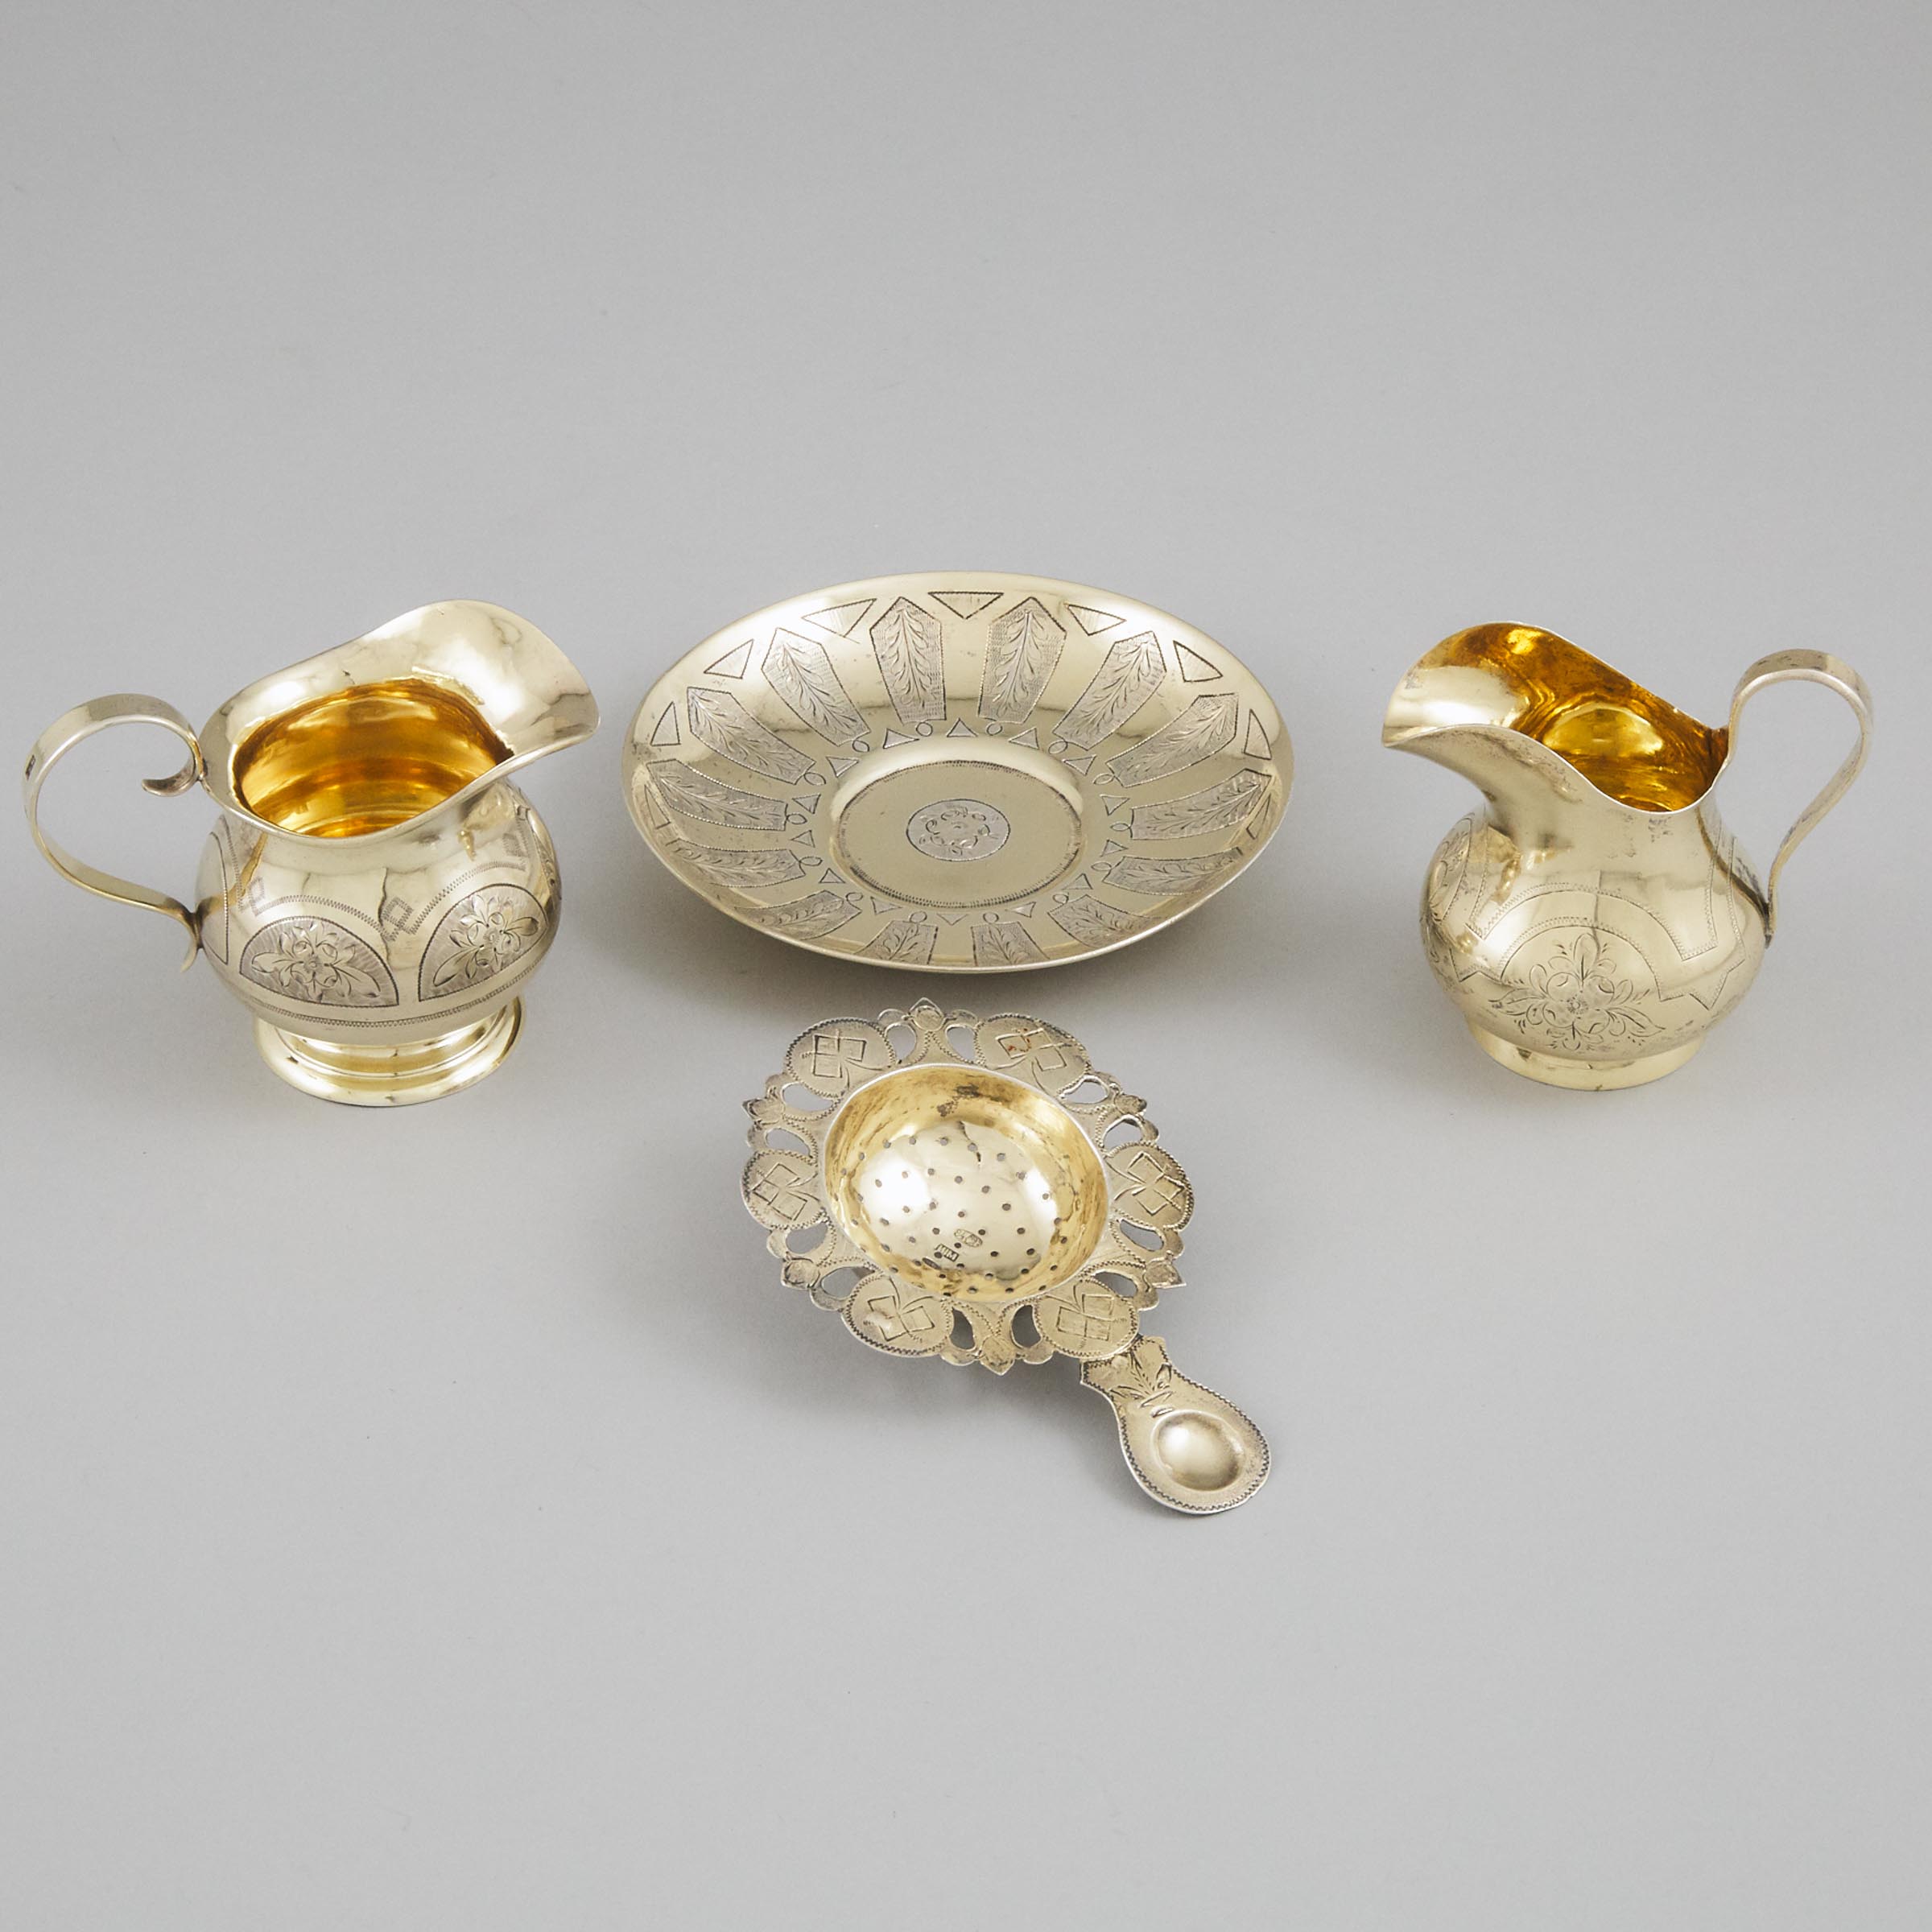 Two Russian Silver-Gilt Cream Jugs, Saucer and a Tea Strainer, late 19th century